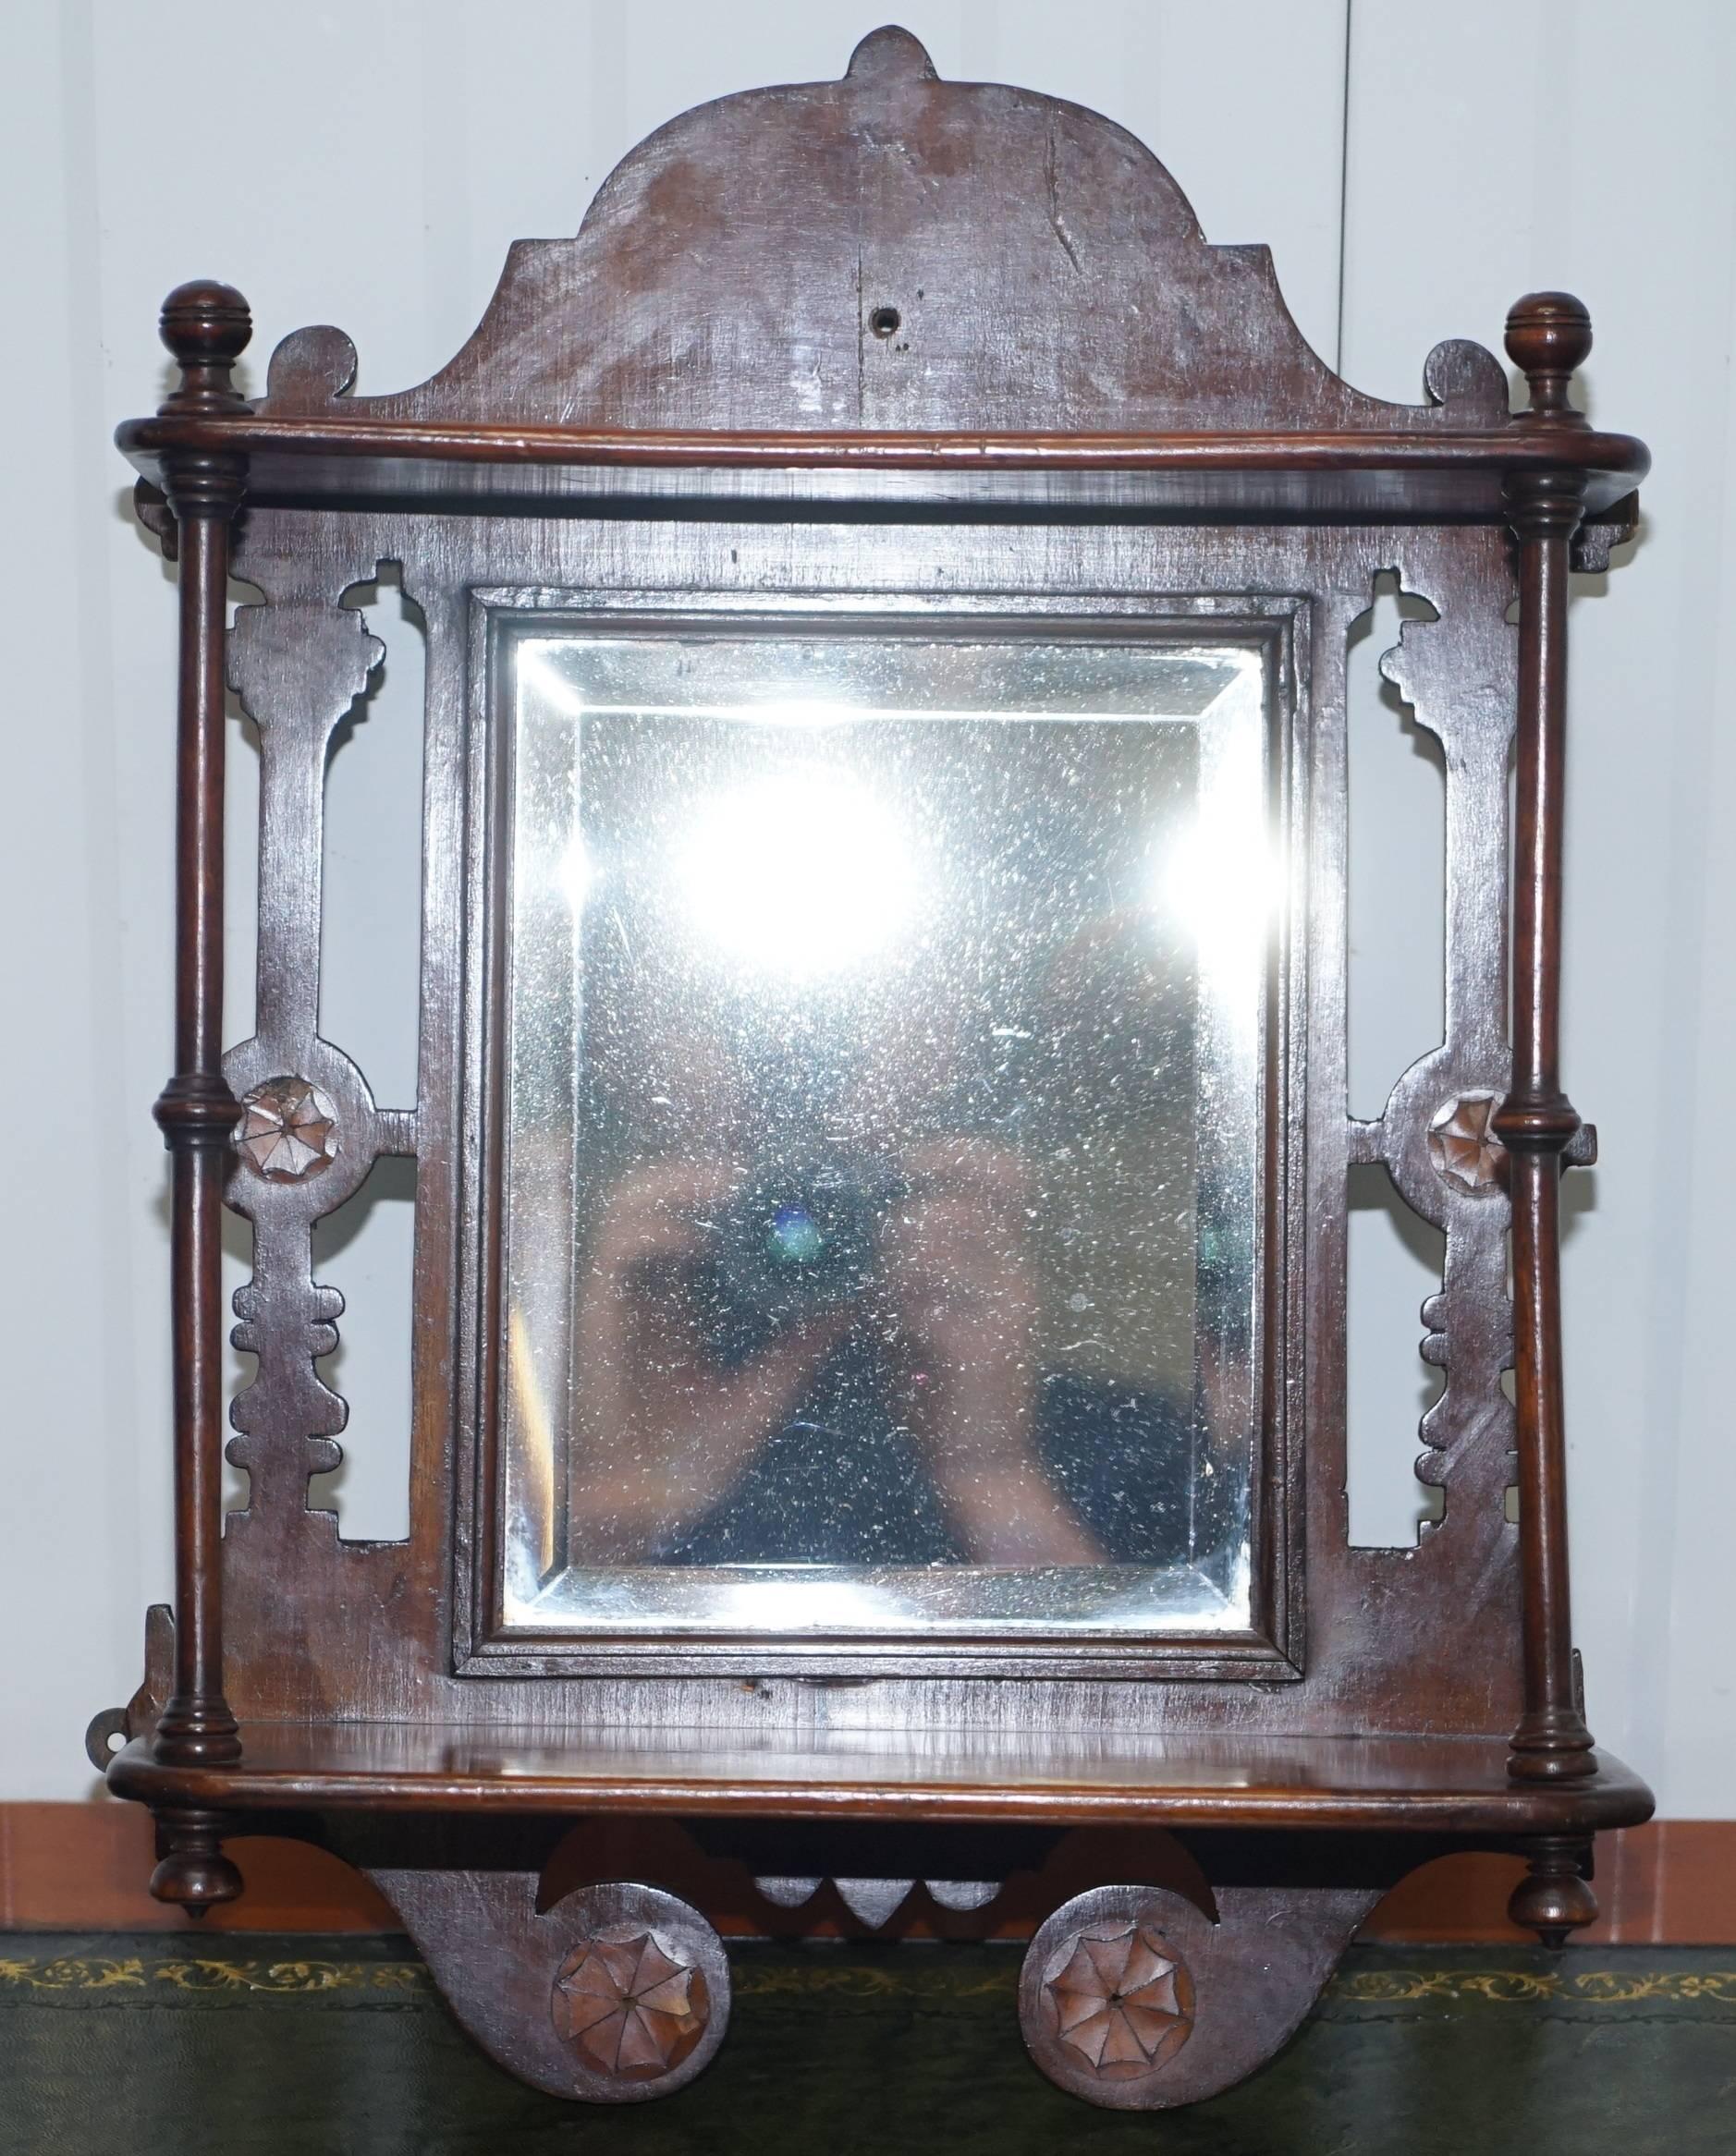 We are delighted to offer for sale this lovely little mahogany shaving mirror with original tapered plate glass.

A very good looking little wall-mounted mirror, you don’t need to use it for shaving of course, it can be anywhere, ideal for a